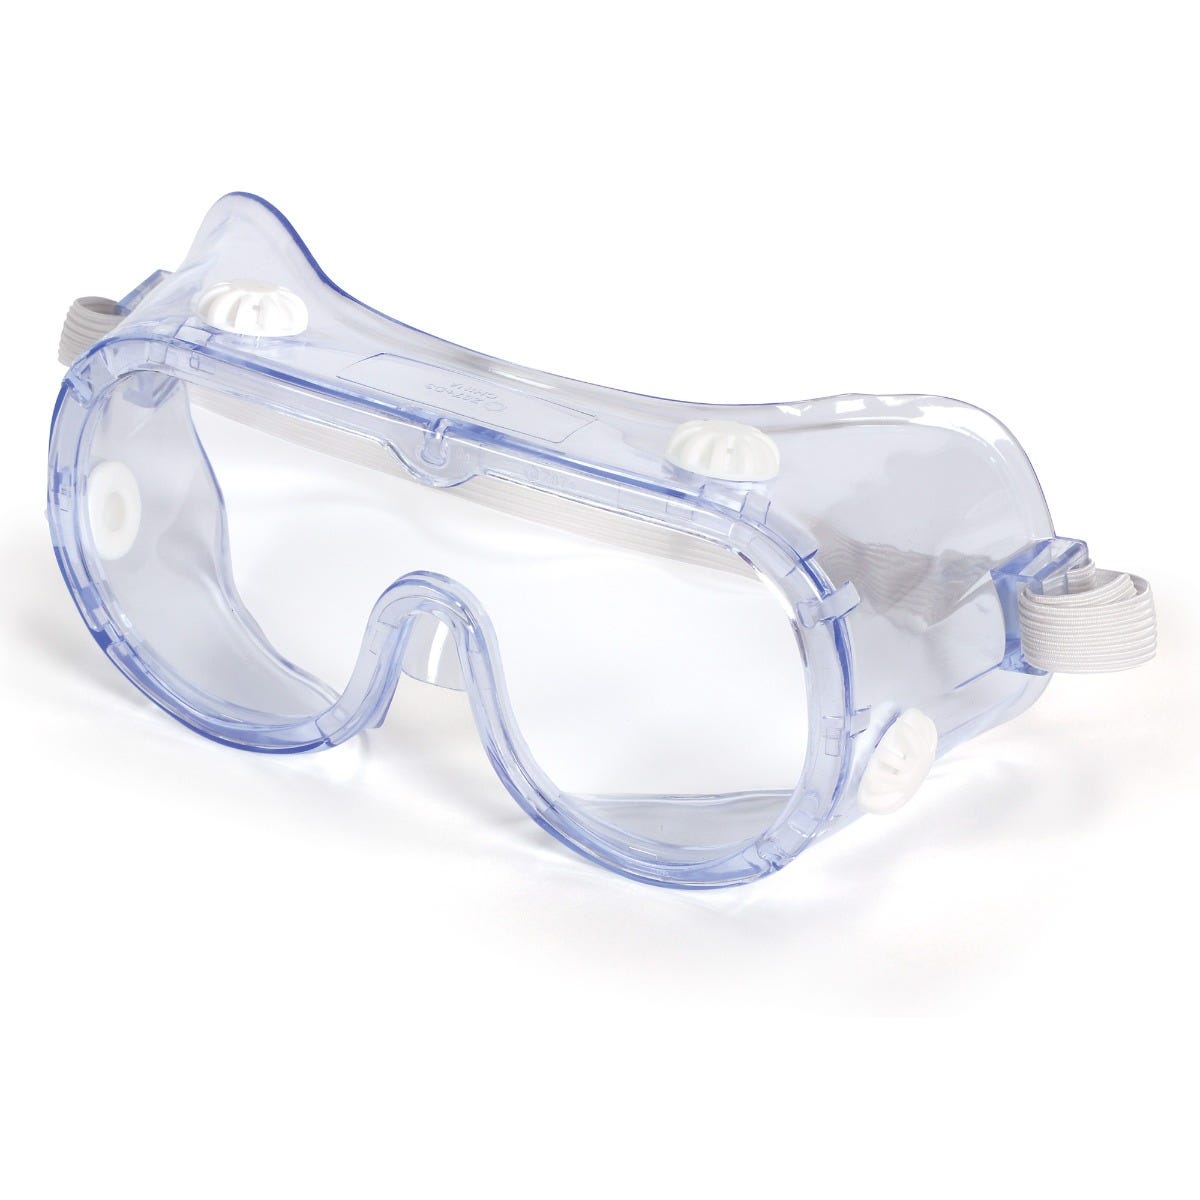 Medical Goggles and Mask Donation